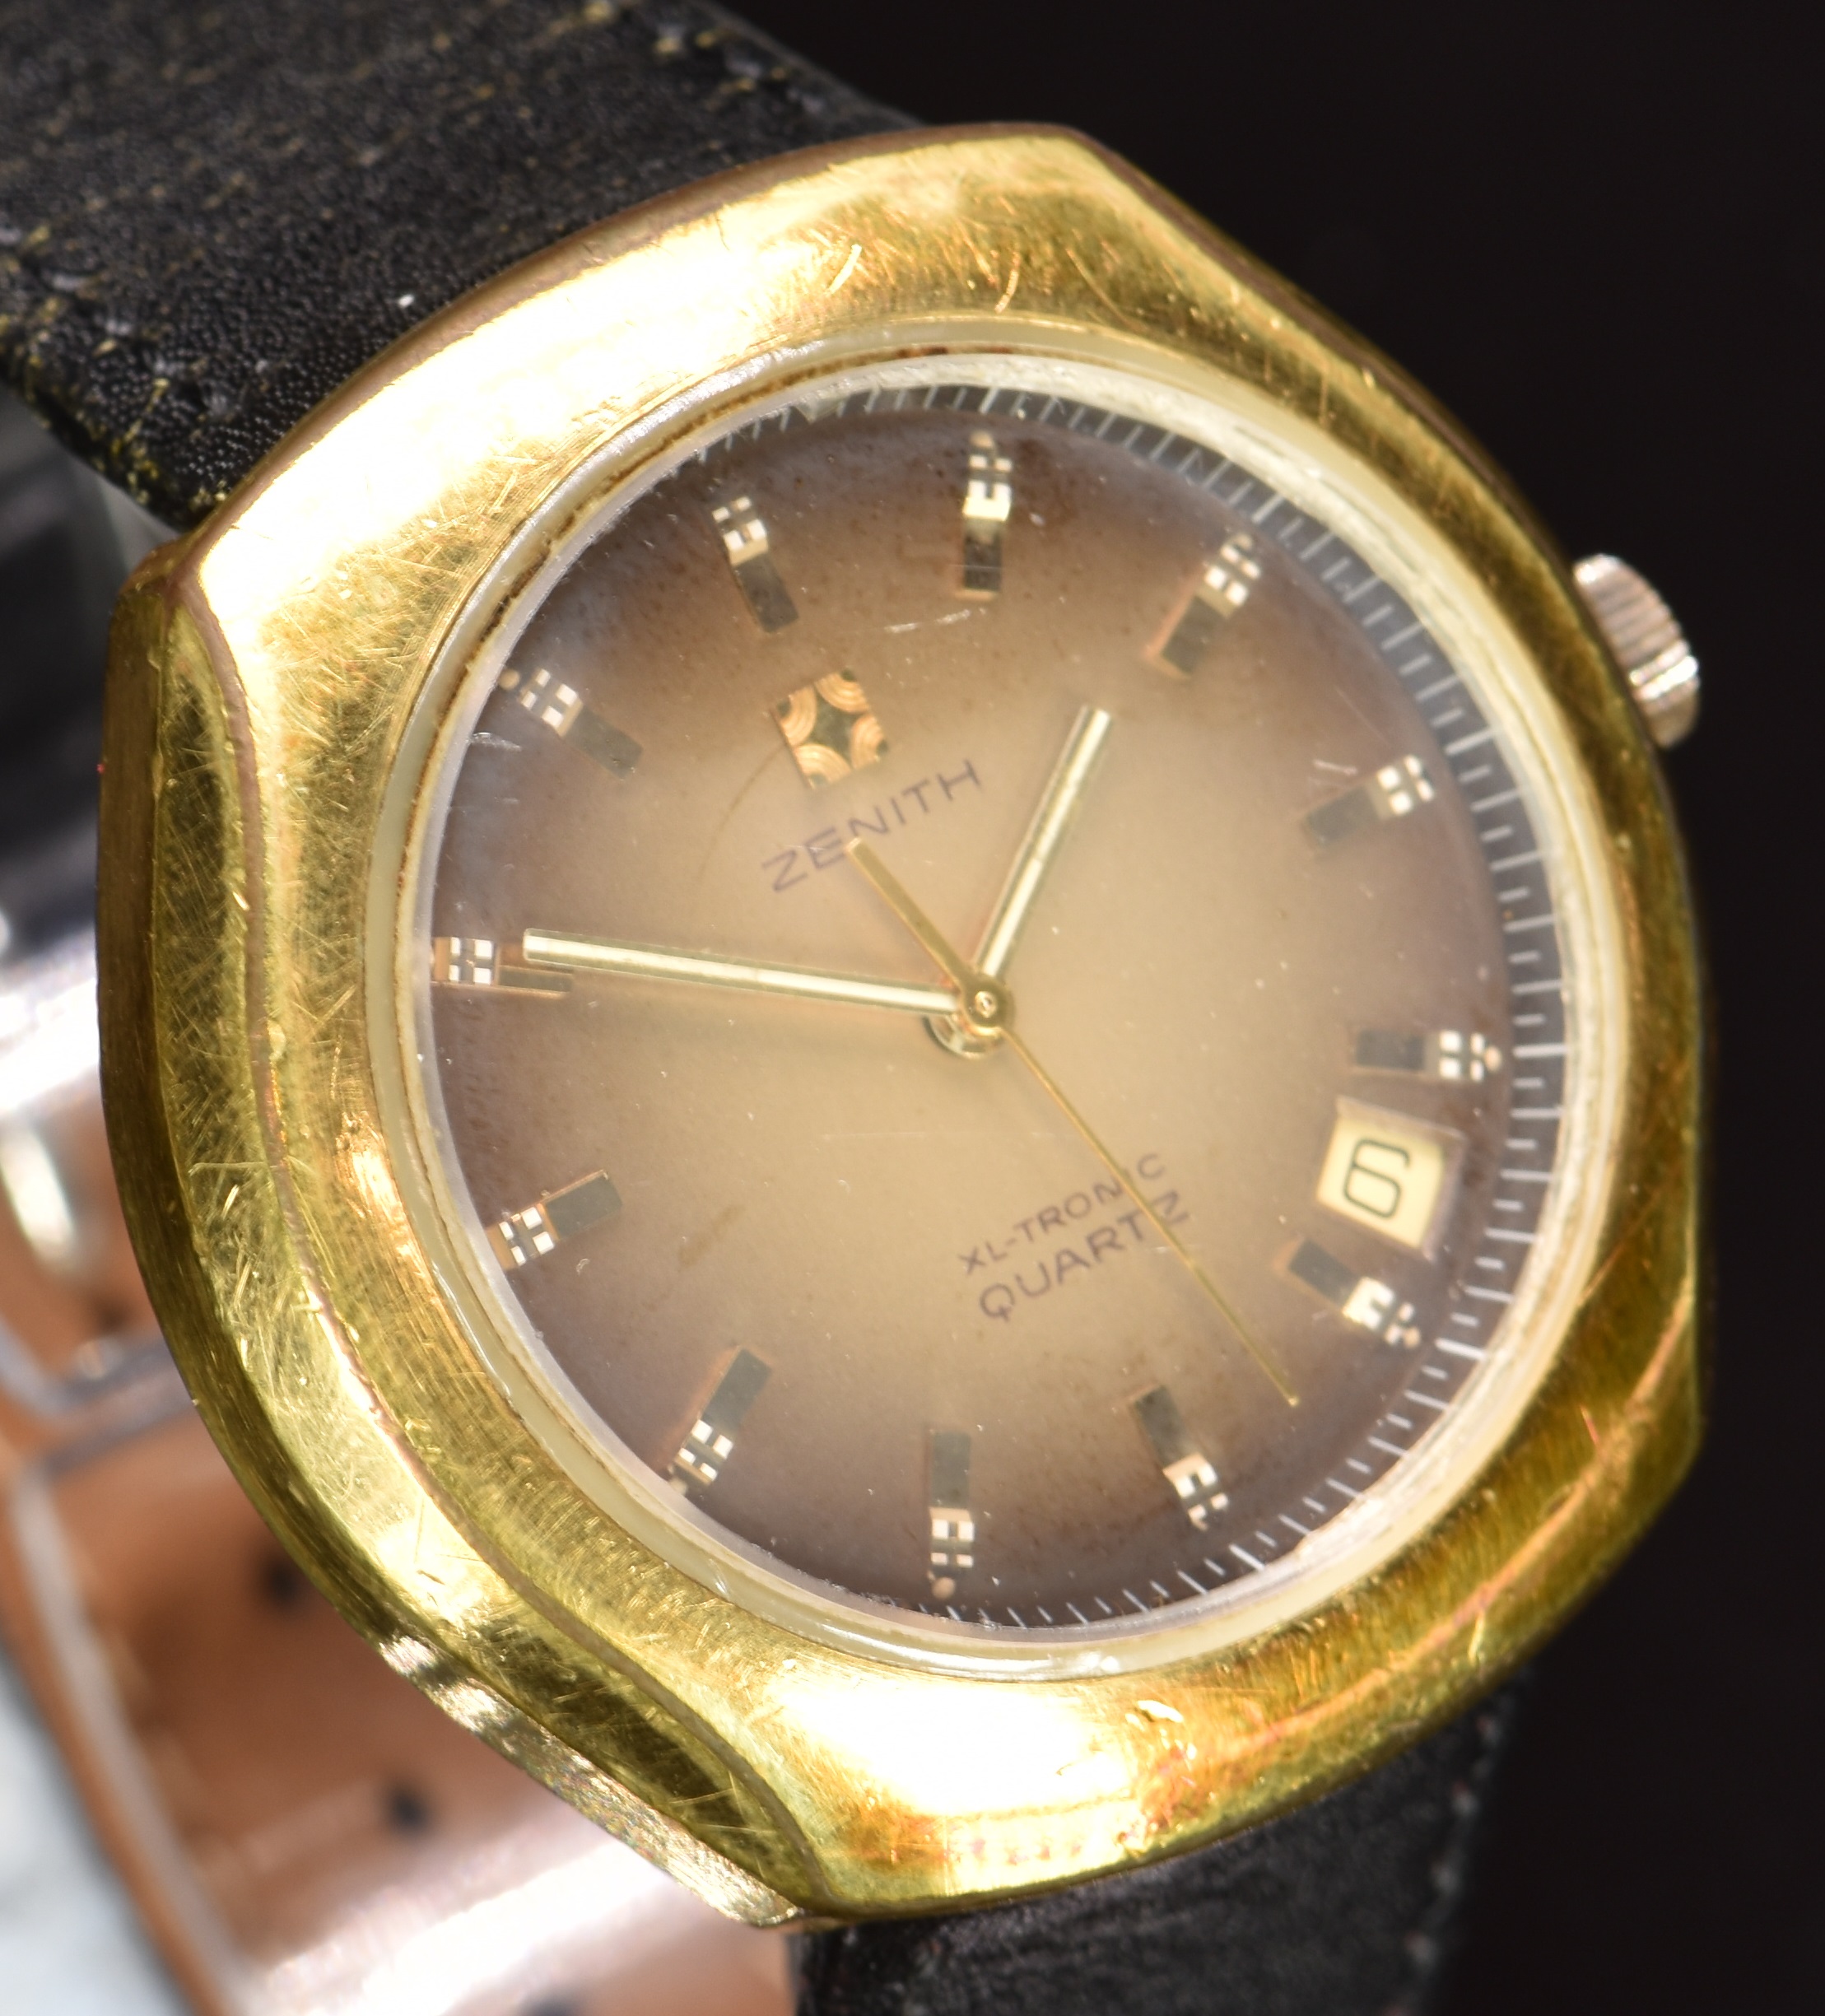 Zenith XL-Tronic gentleman's wristwatch ref. 20-0040-510 with date aperture, gold hands and hour - Image 3 of 5